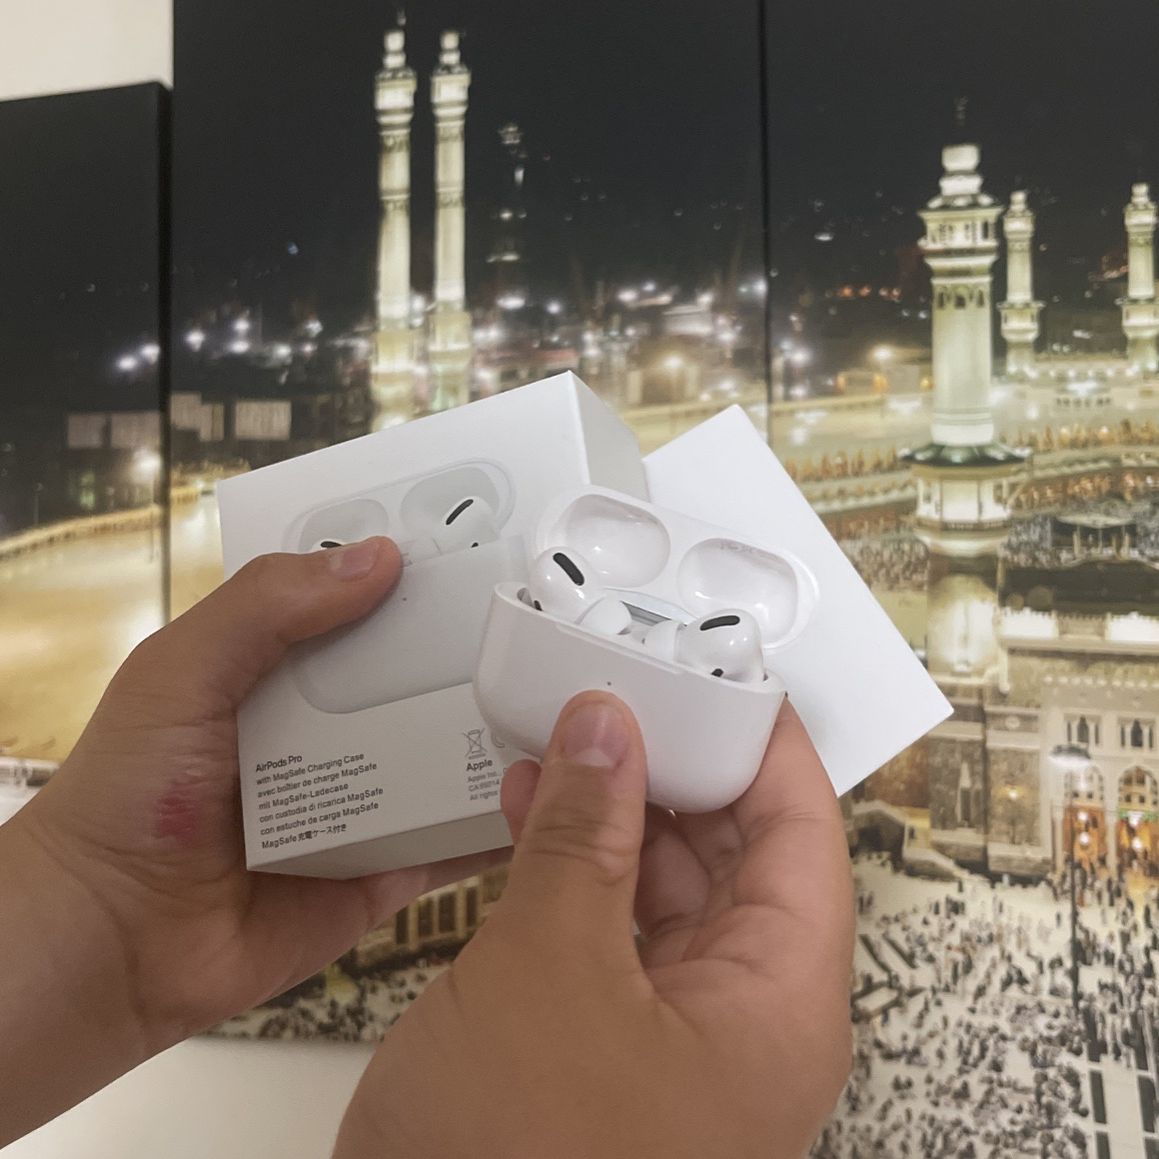 BRAND NEW "Airpods Pro" PRICE NEGOTIABLE 